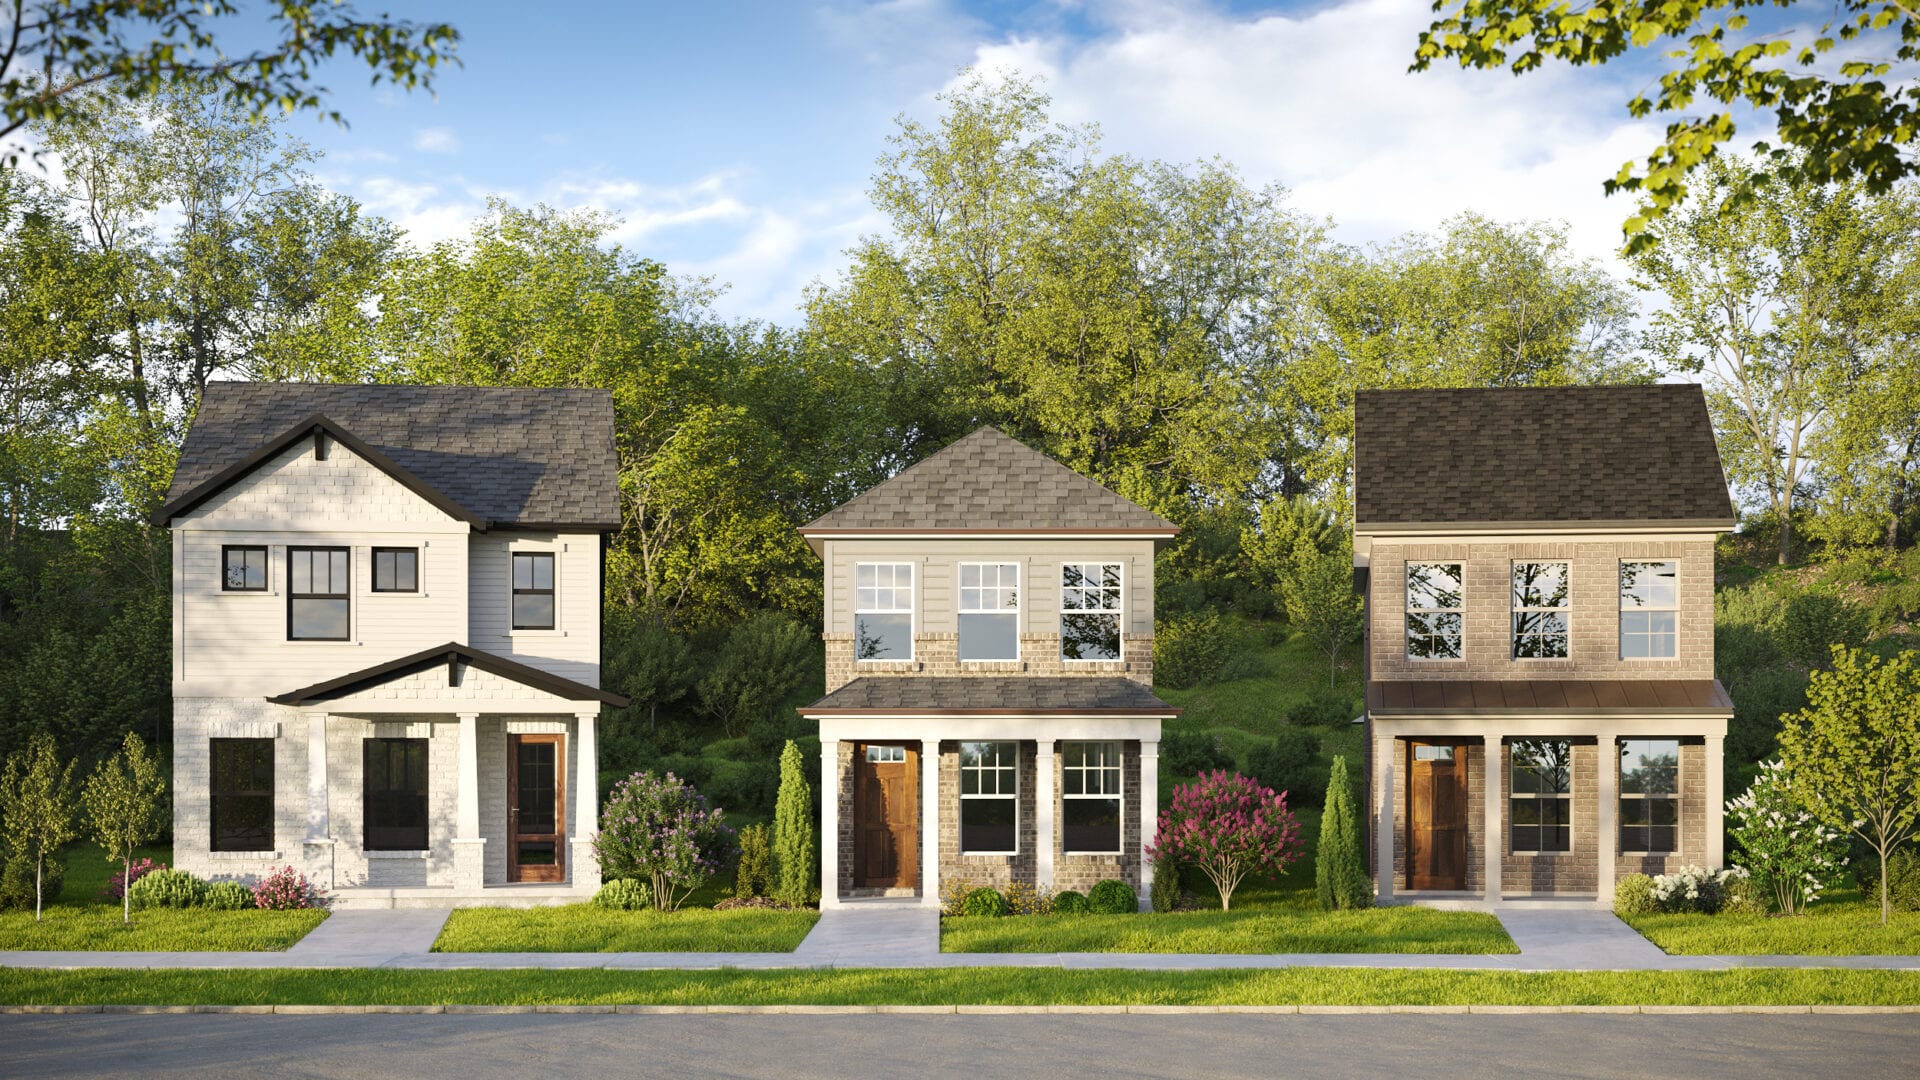 Ranch Style Homes from New Home Builders - Hamlet South New Home Communities in Nashville, TN